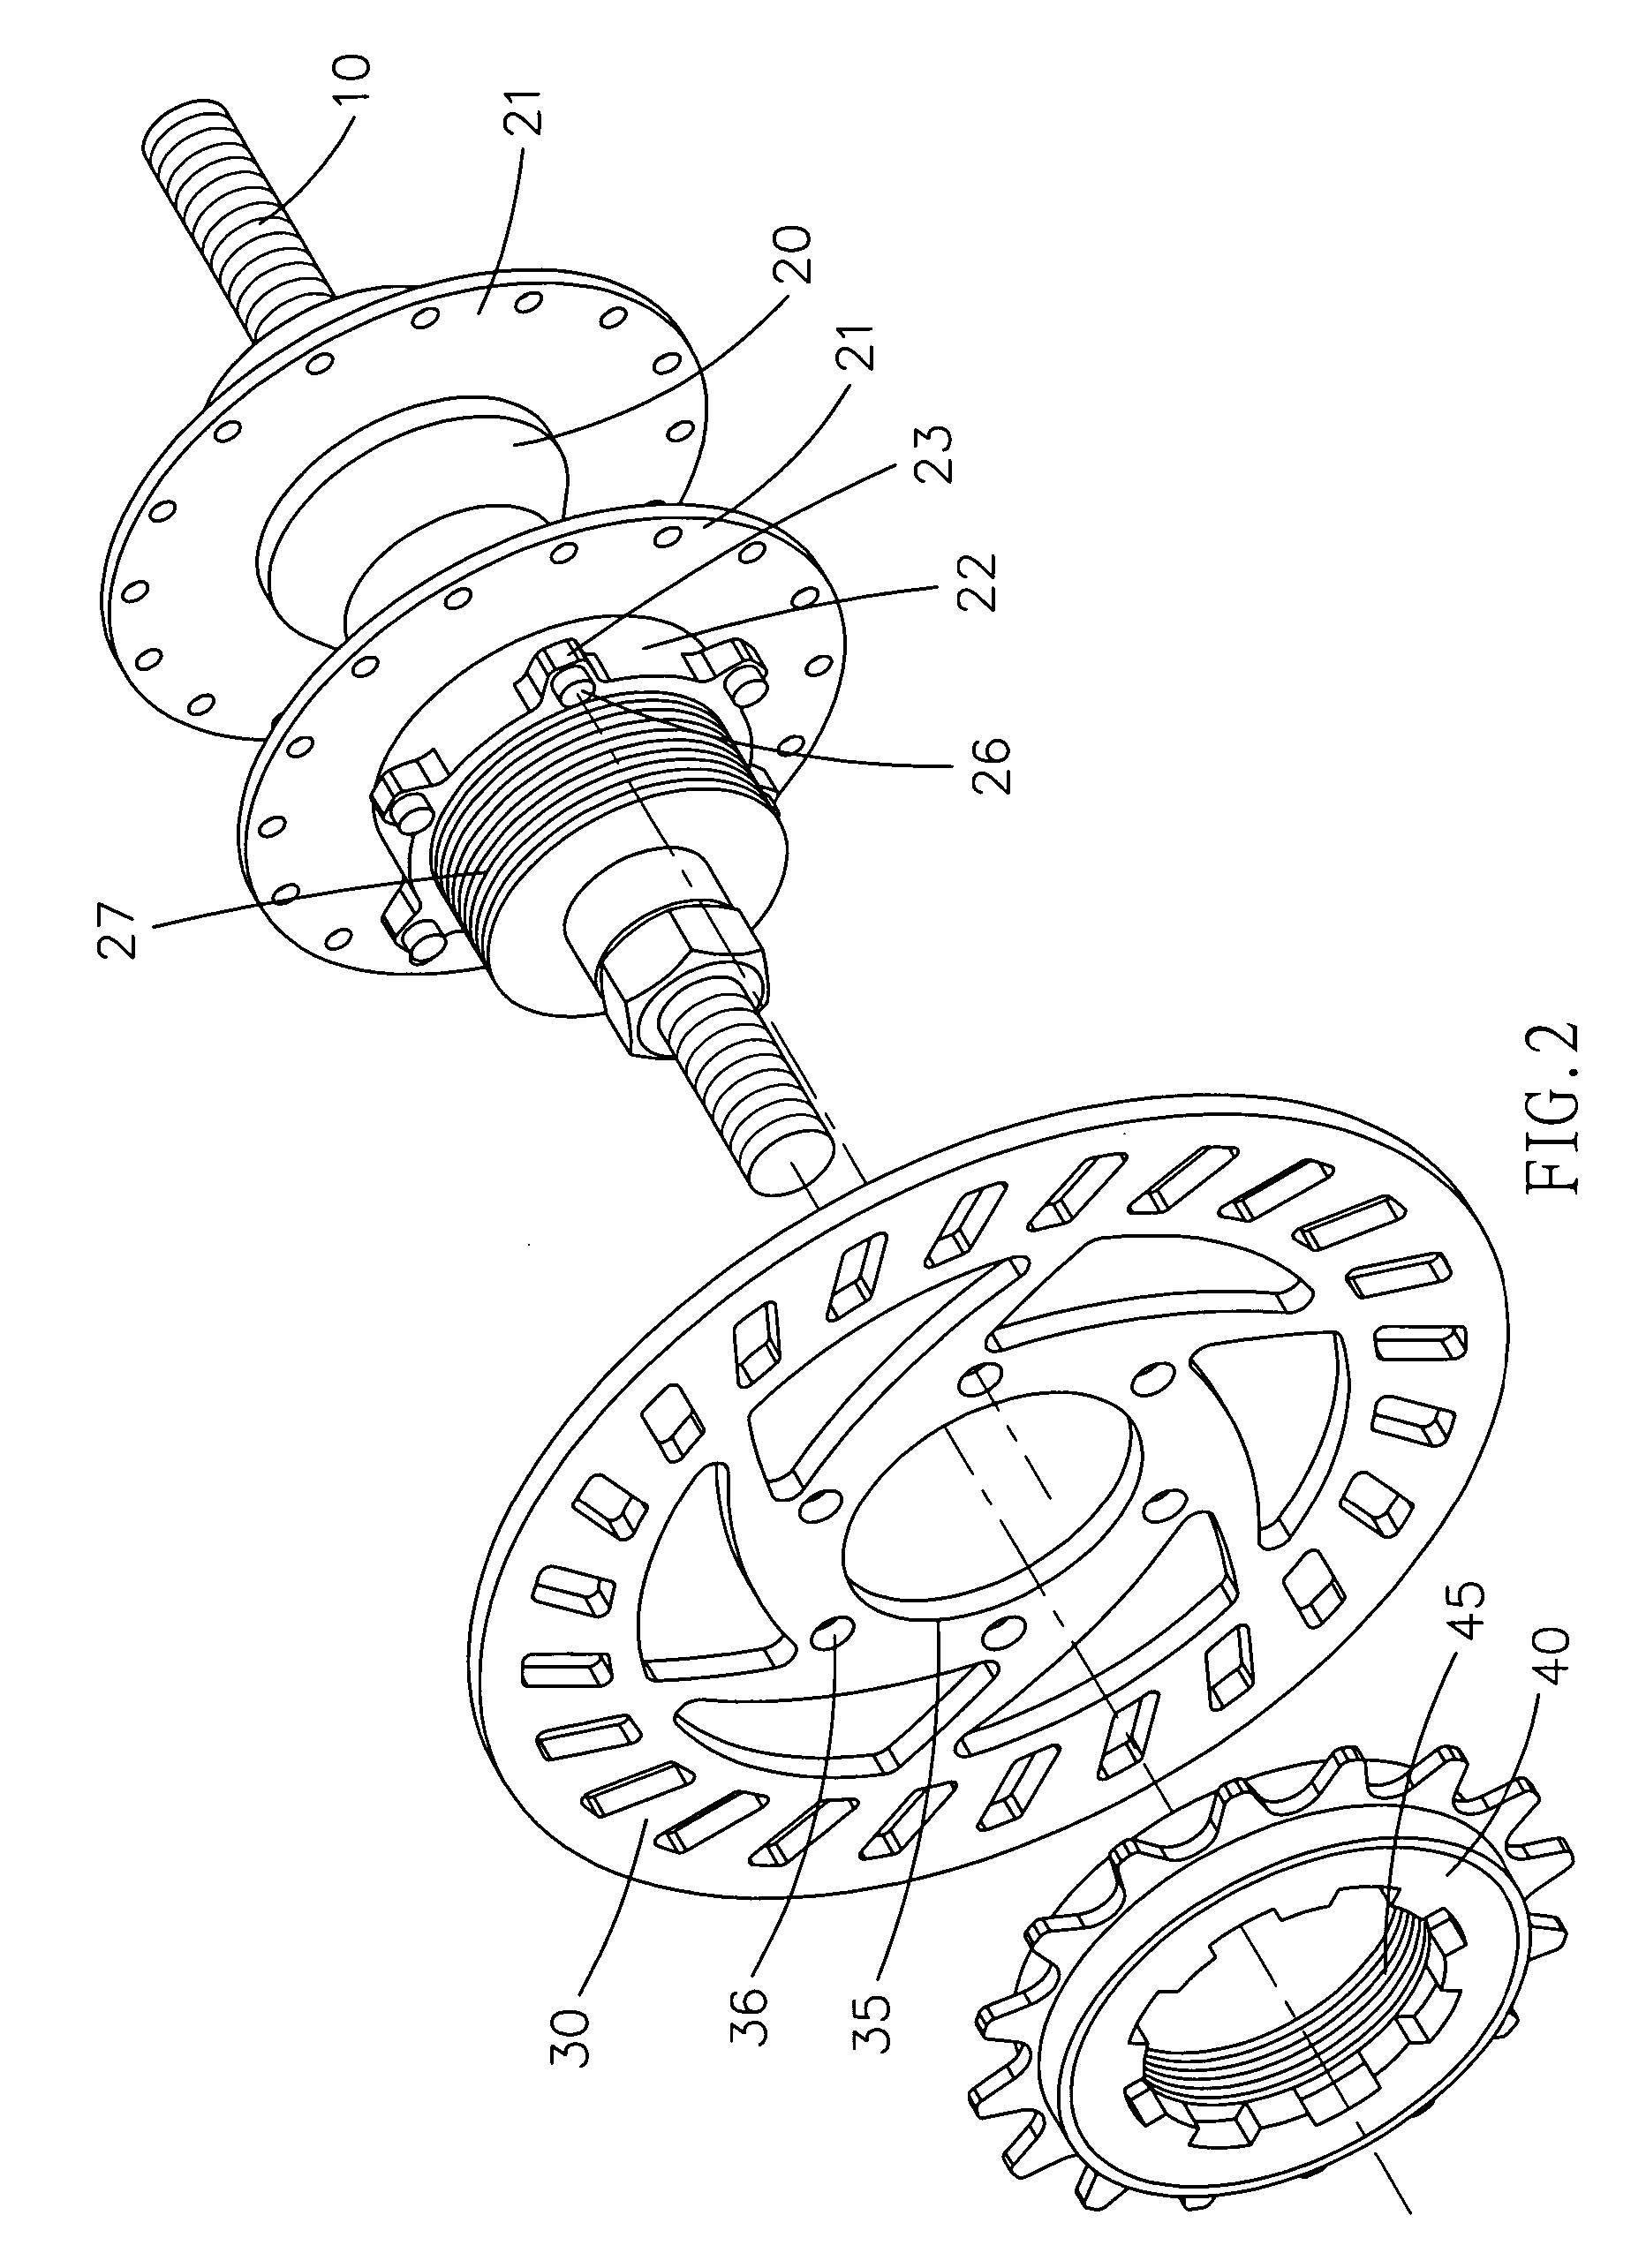 Hub assembly for disk brake of bicycle